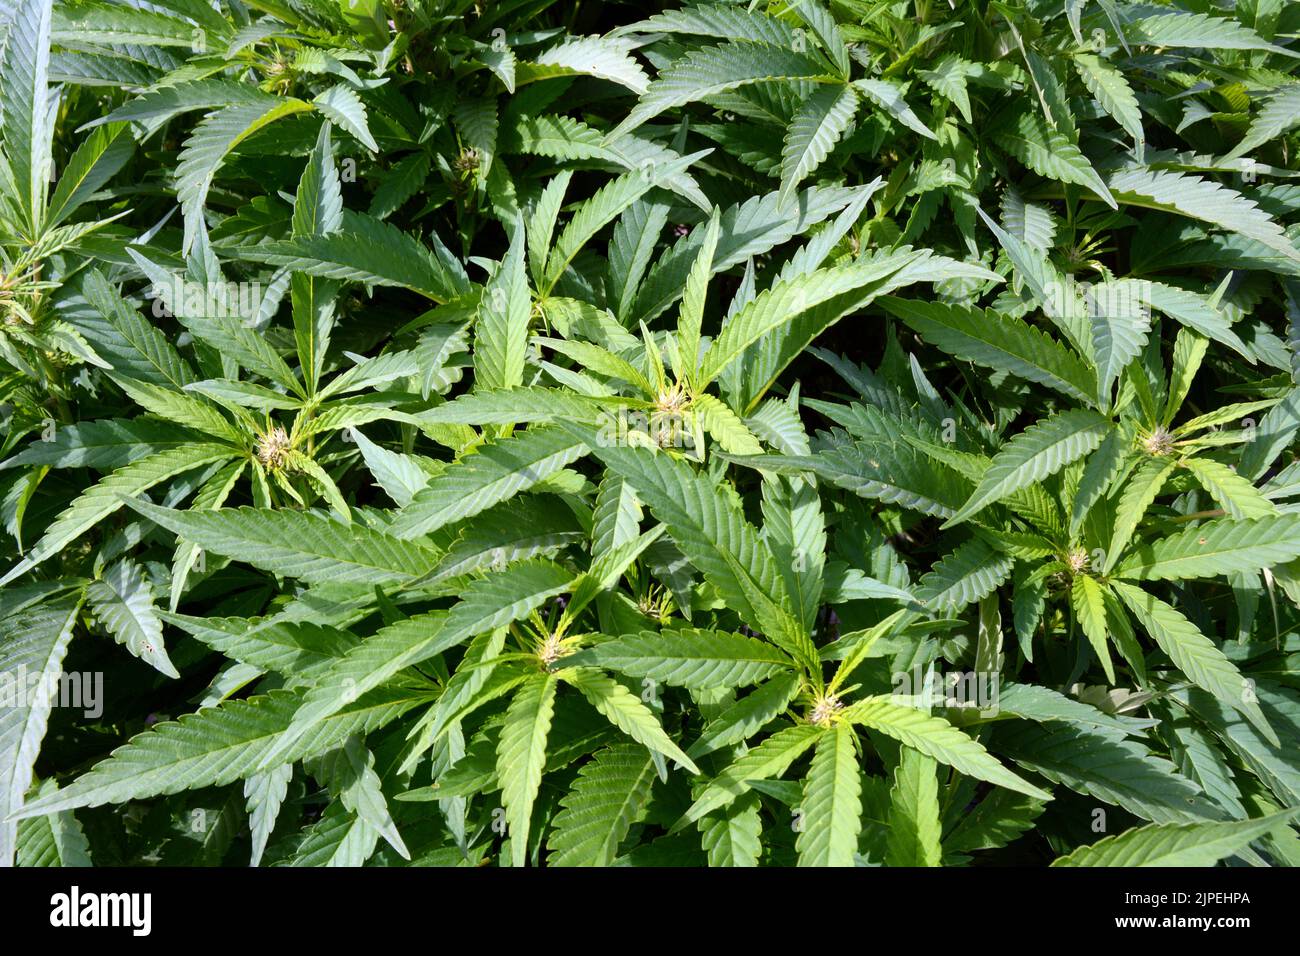 Legal recreational marijuana or cannabis plants being grown outdoors on a sustainable farm near the town of Creemore, Ontario, Canada. Stock Photo